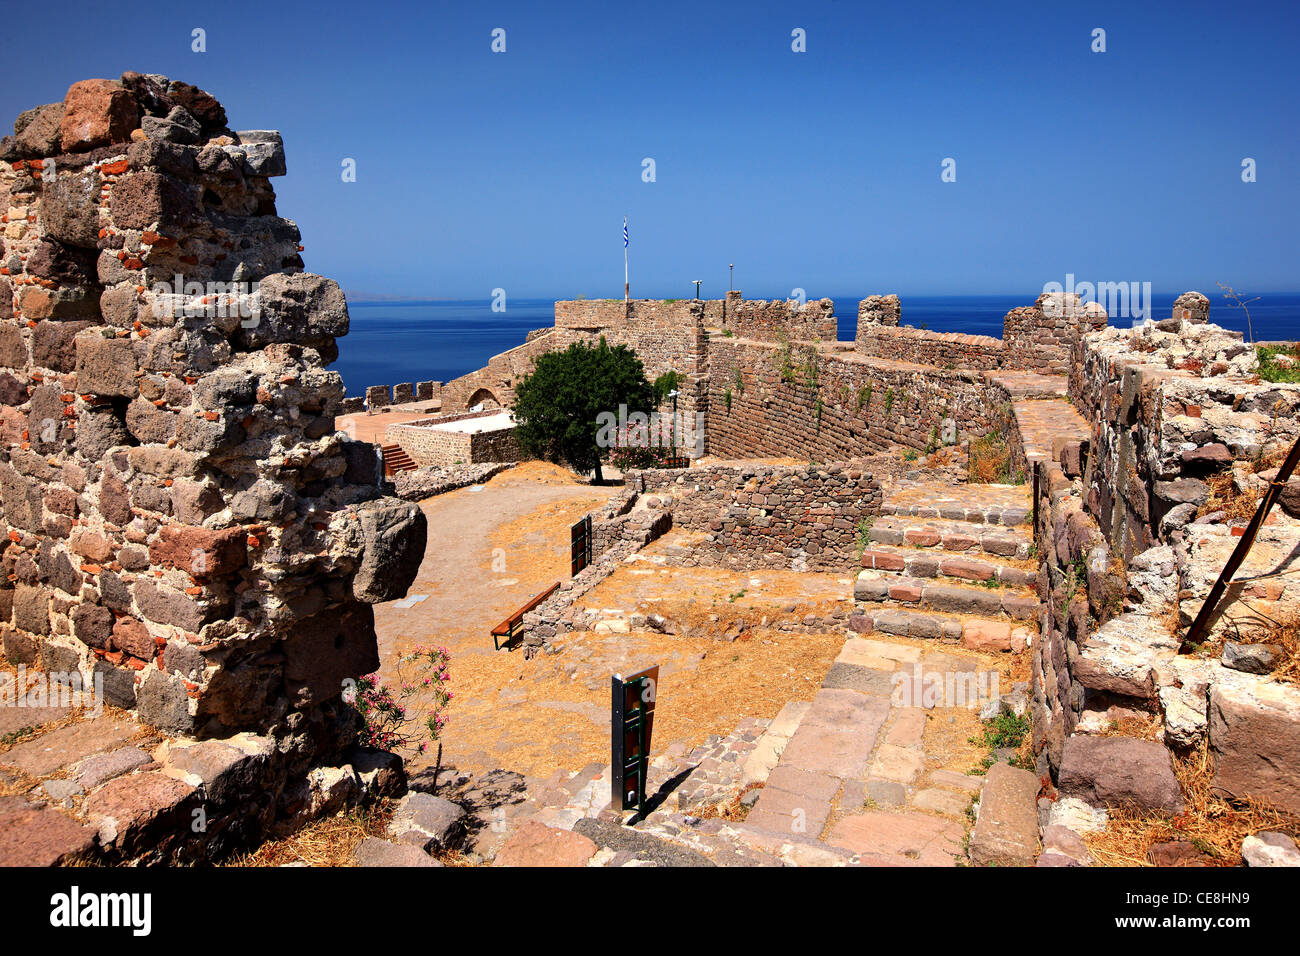 'Inside' view of the castle of Molyvos, Lesvos island, northern Aegean, Greece Stock Photo